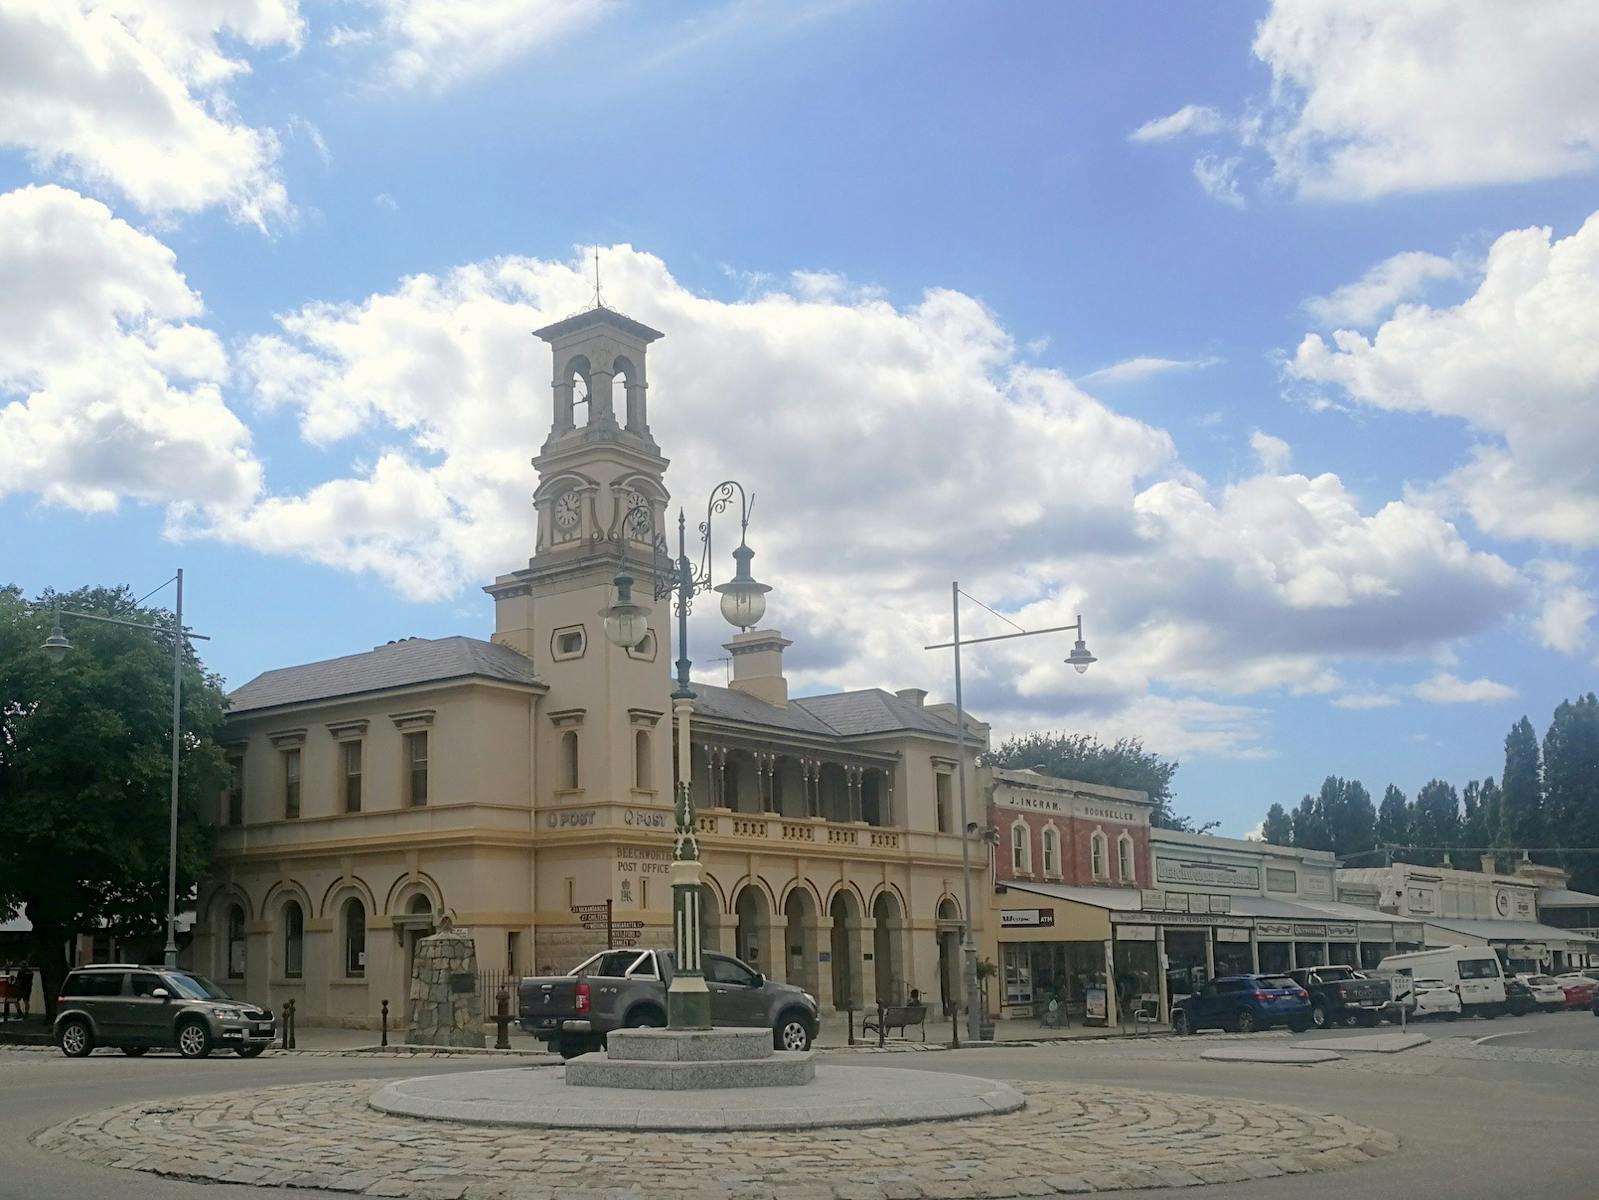 The charming town of Beechworth